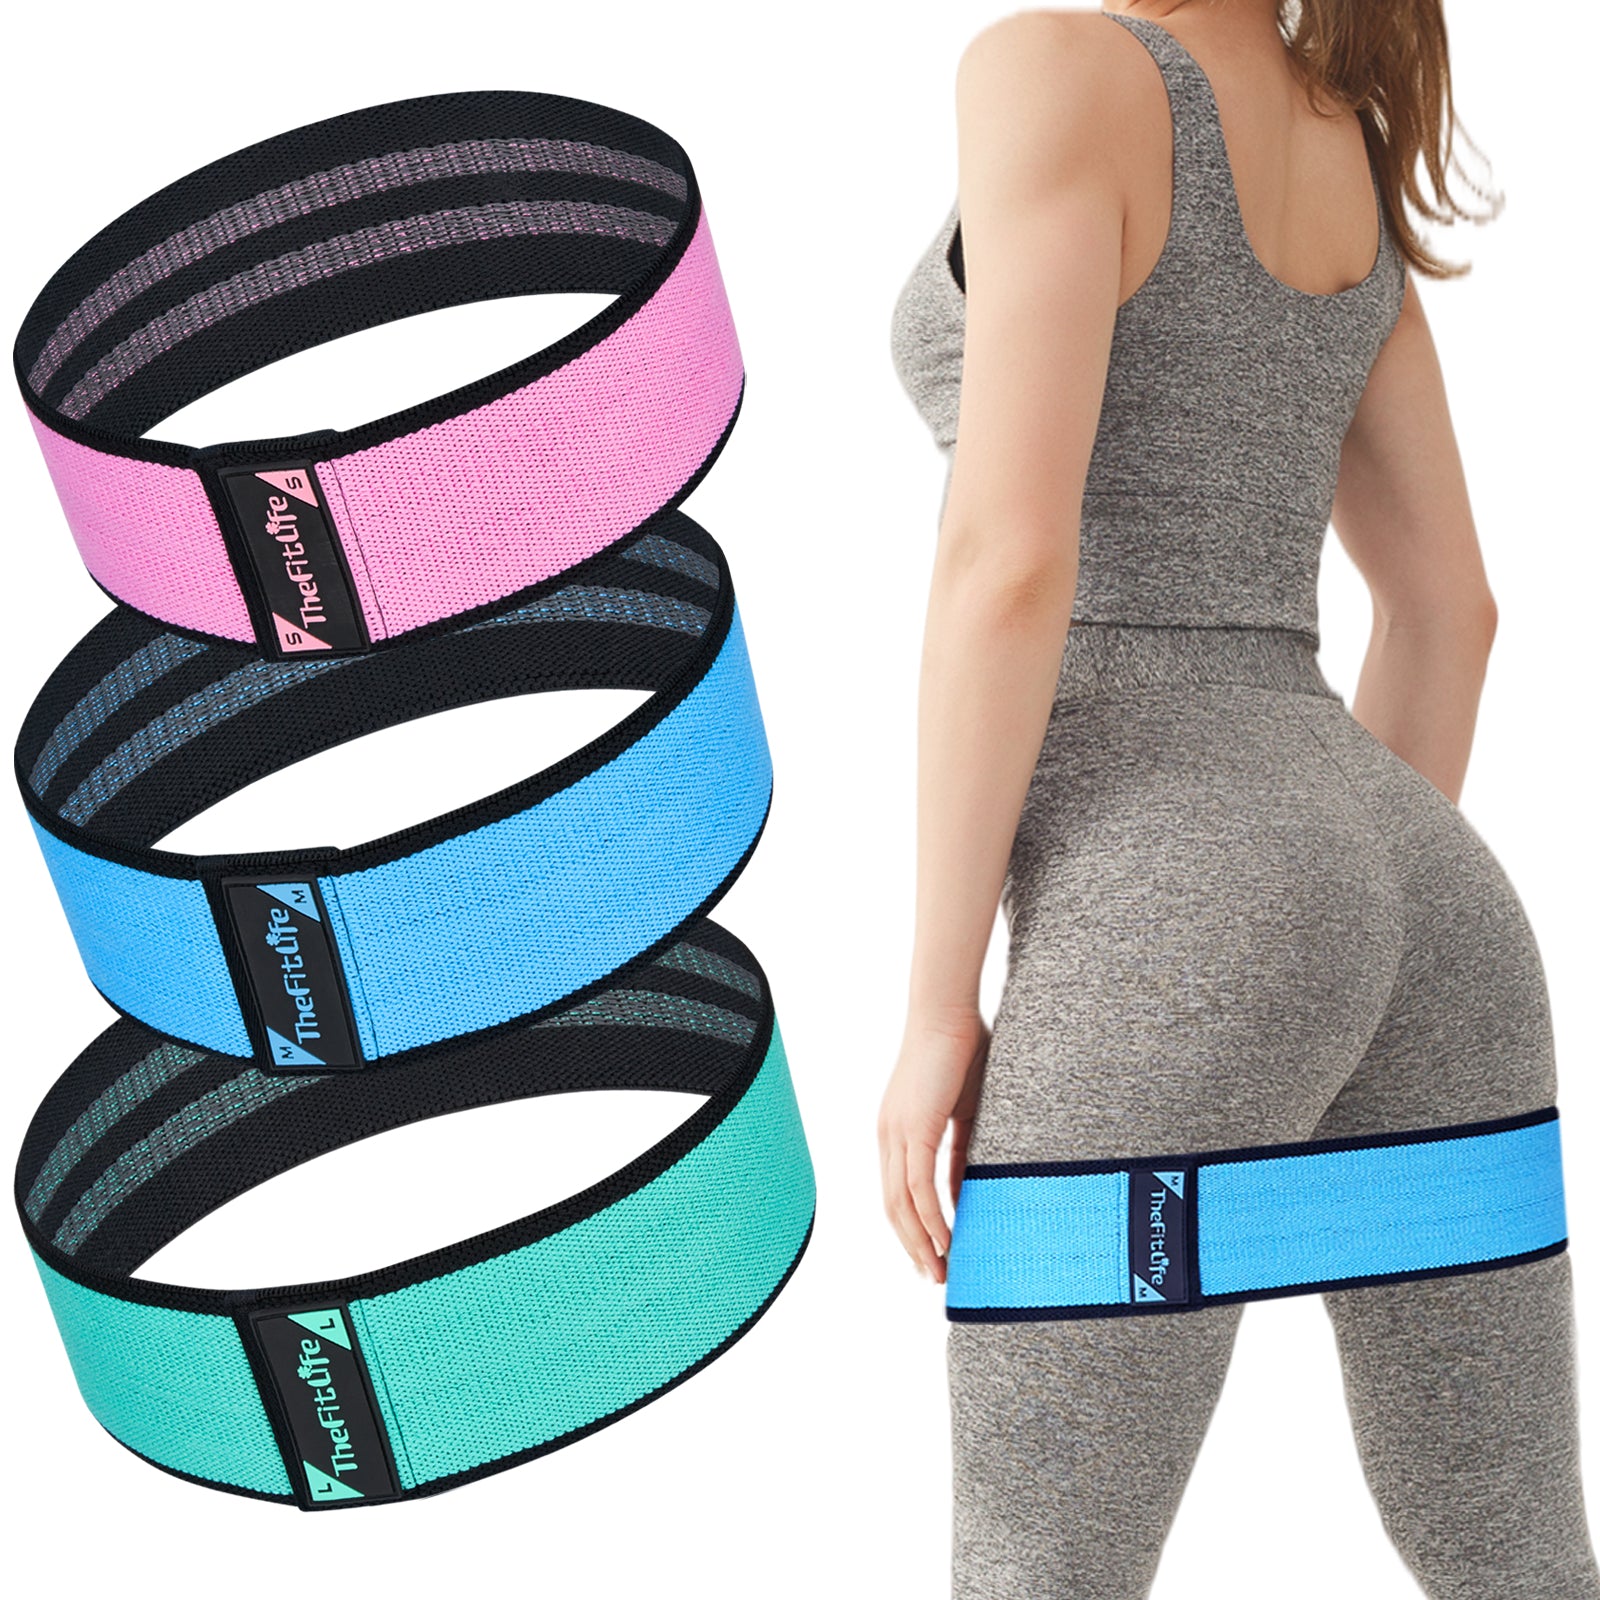 Young Trendz Non Slip Yoga Resistance Bands for Legs and Butt